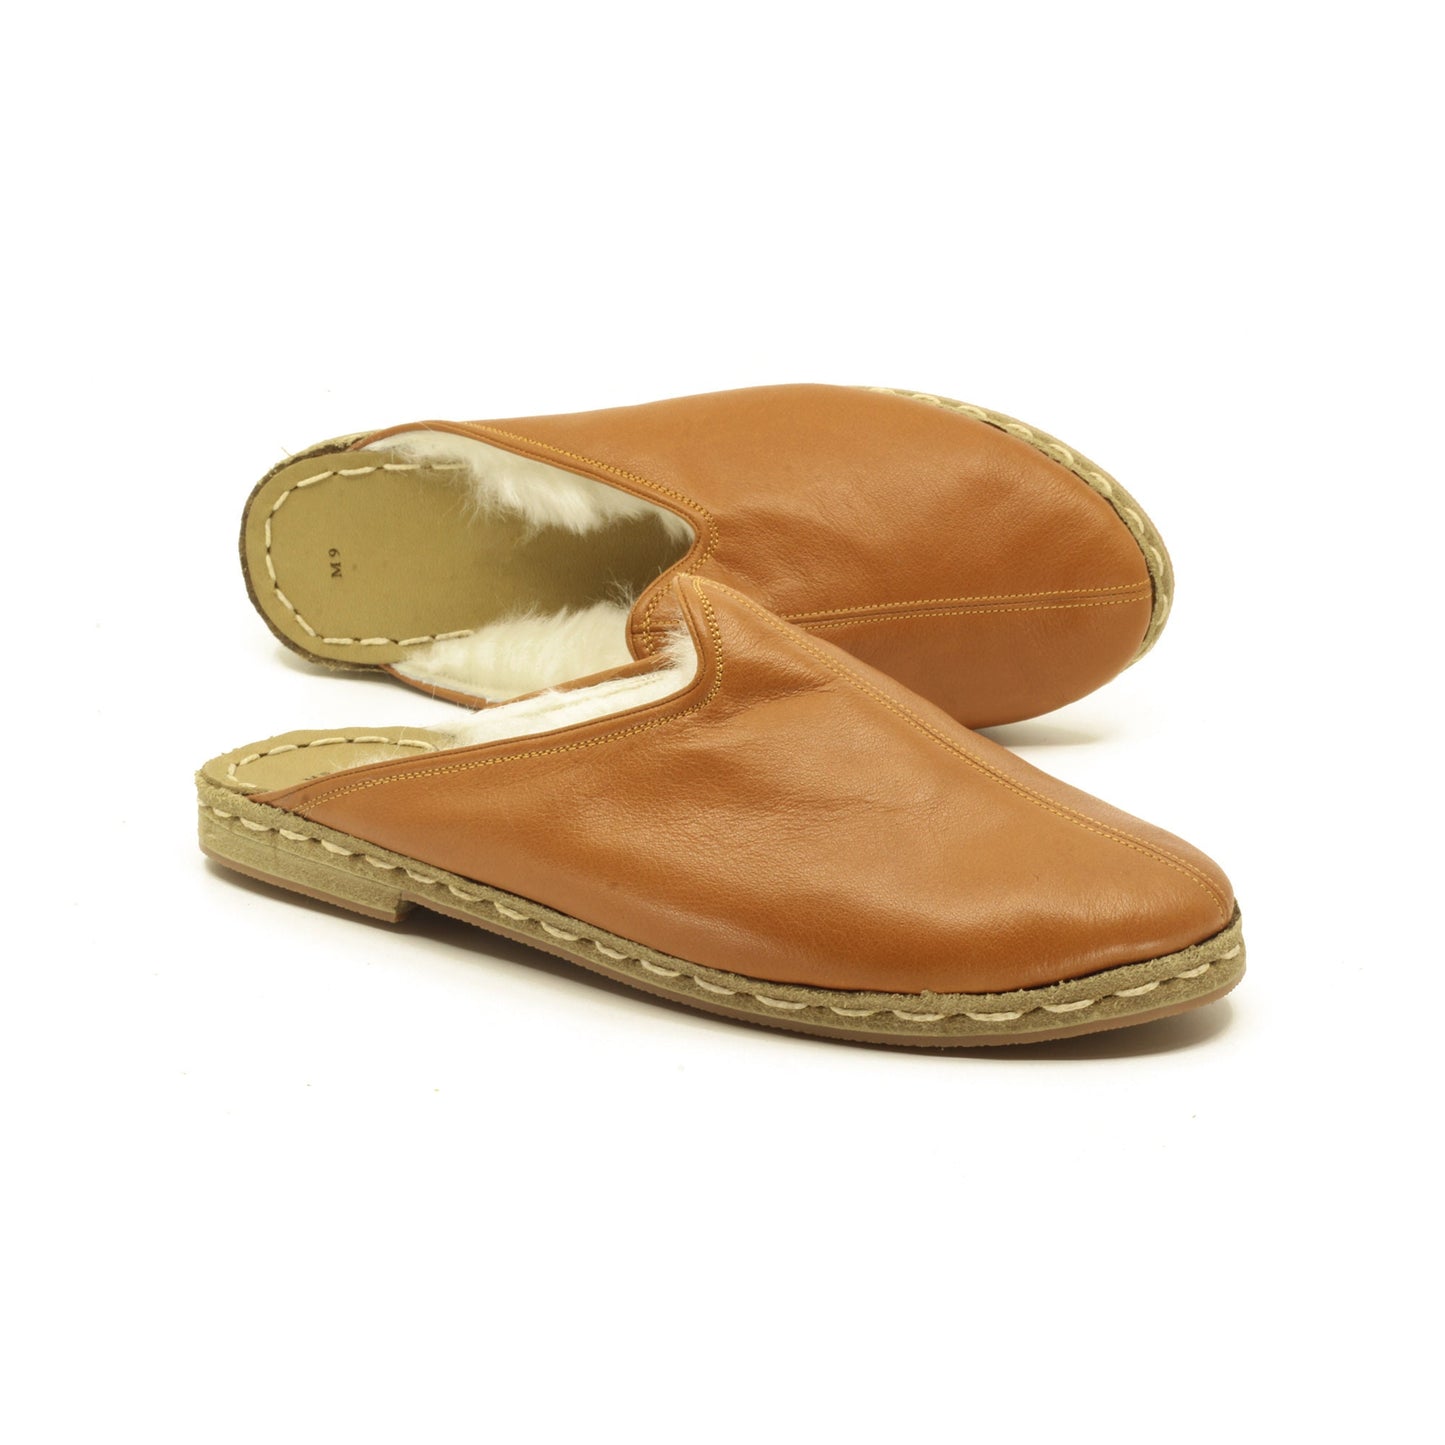 Winter Slippers  - Sheepskin slippers  - Close Toed Slippers - Flat Brown Leather – Rubber Sole - For Women